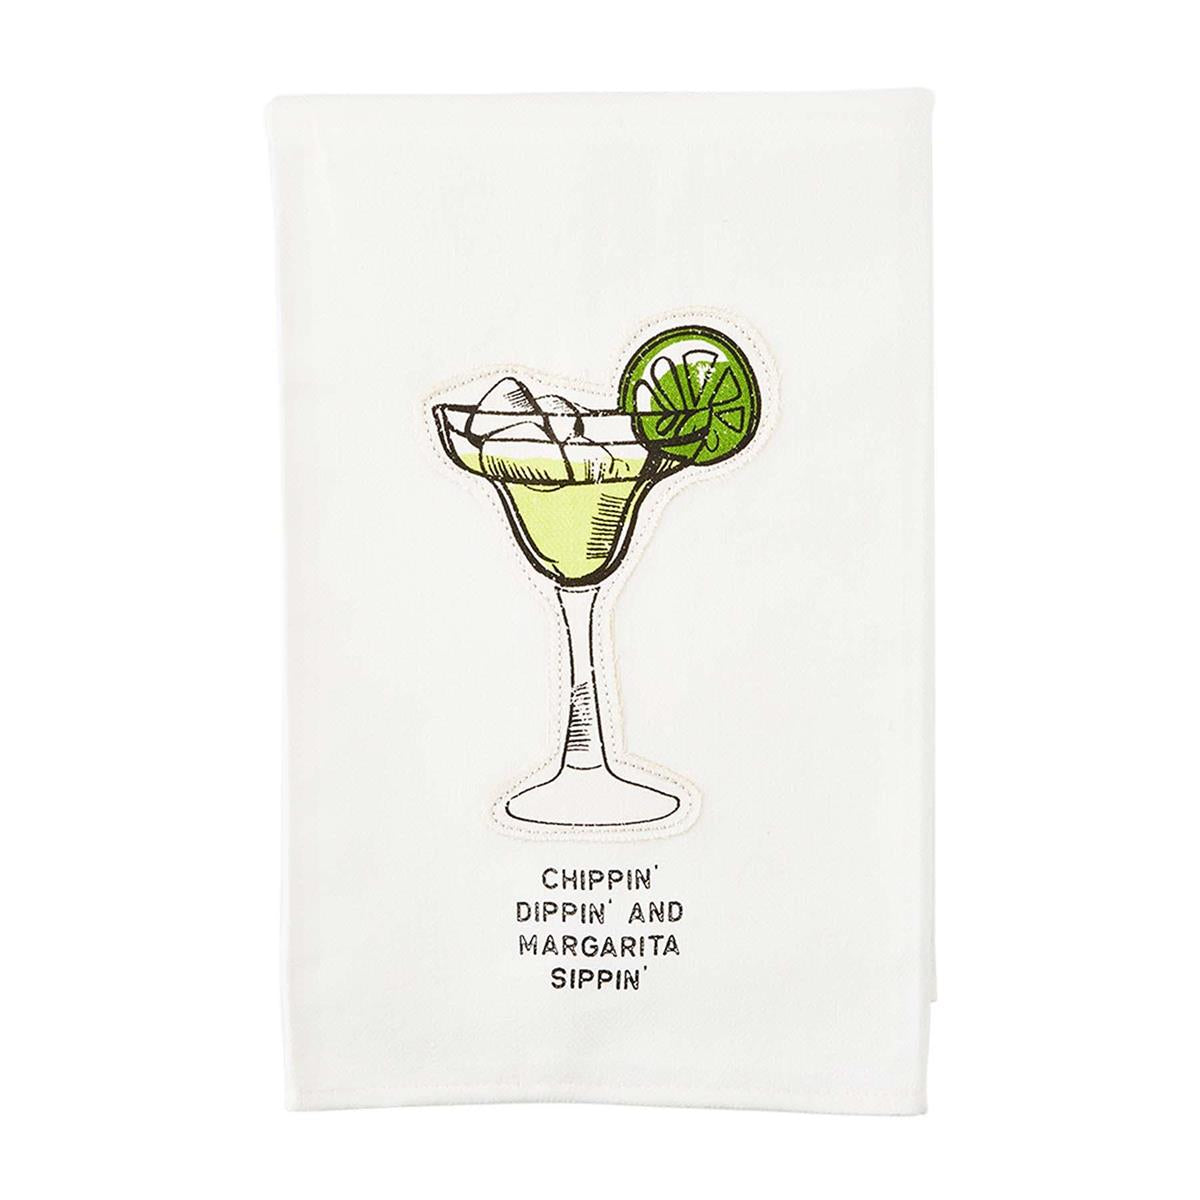 margarita fiesta appliqued towel with magarita glass graphic and text "chippin' dippin' and margarita sippin'"  on a white background